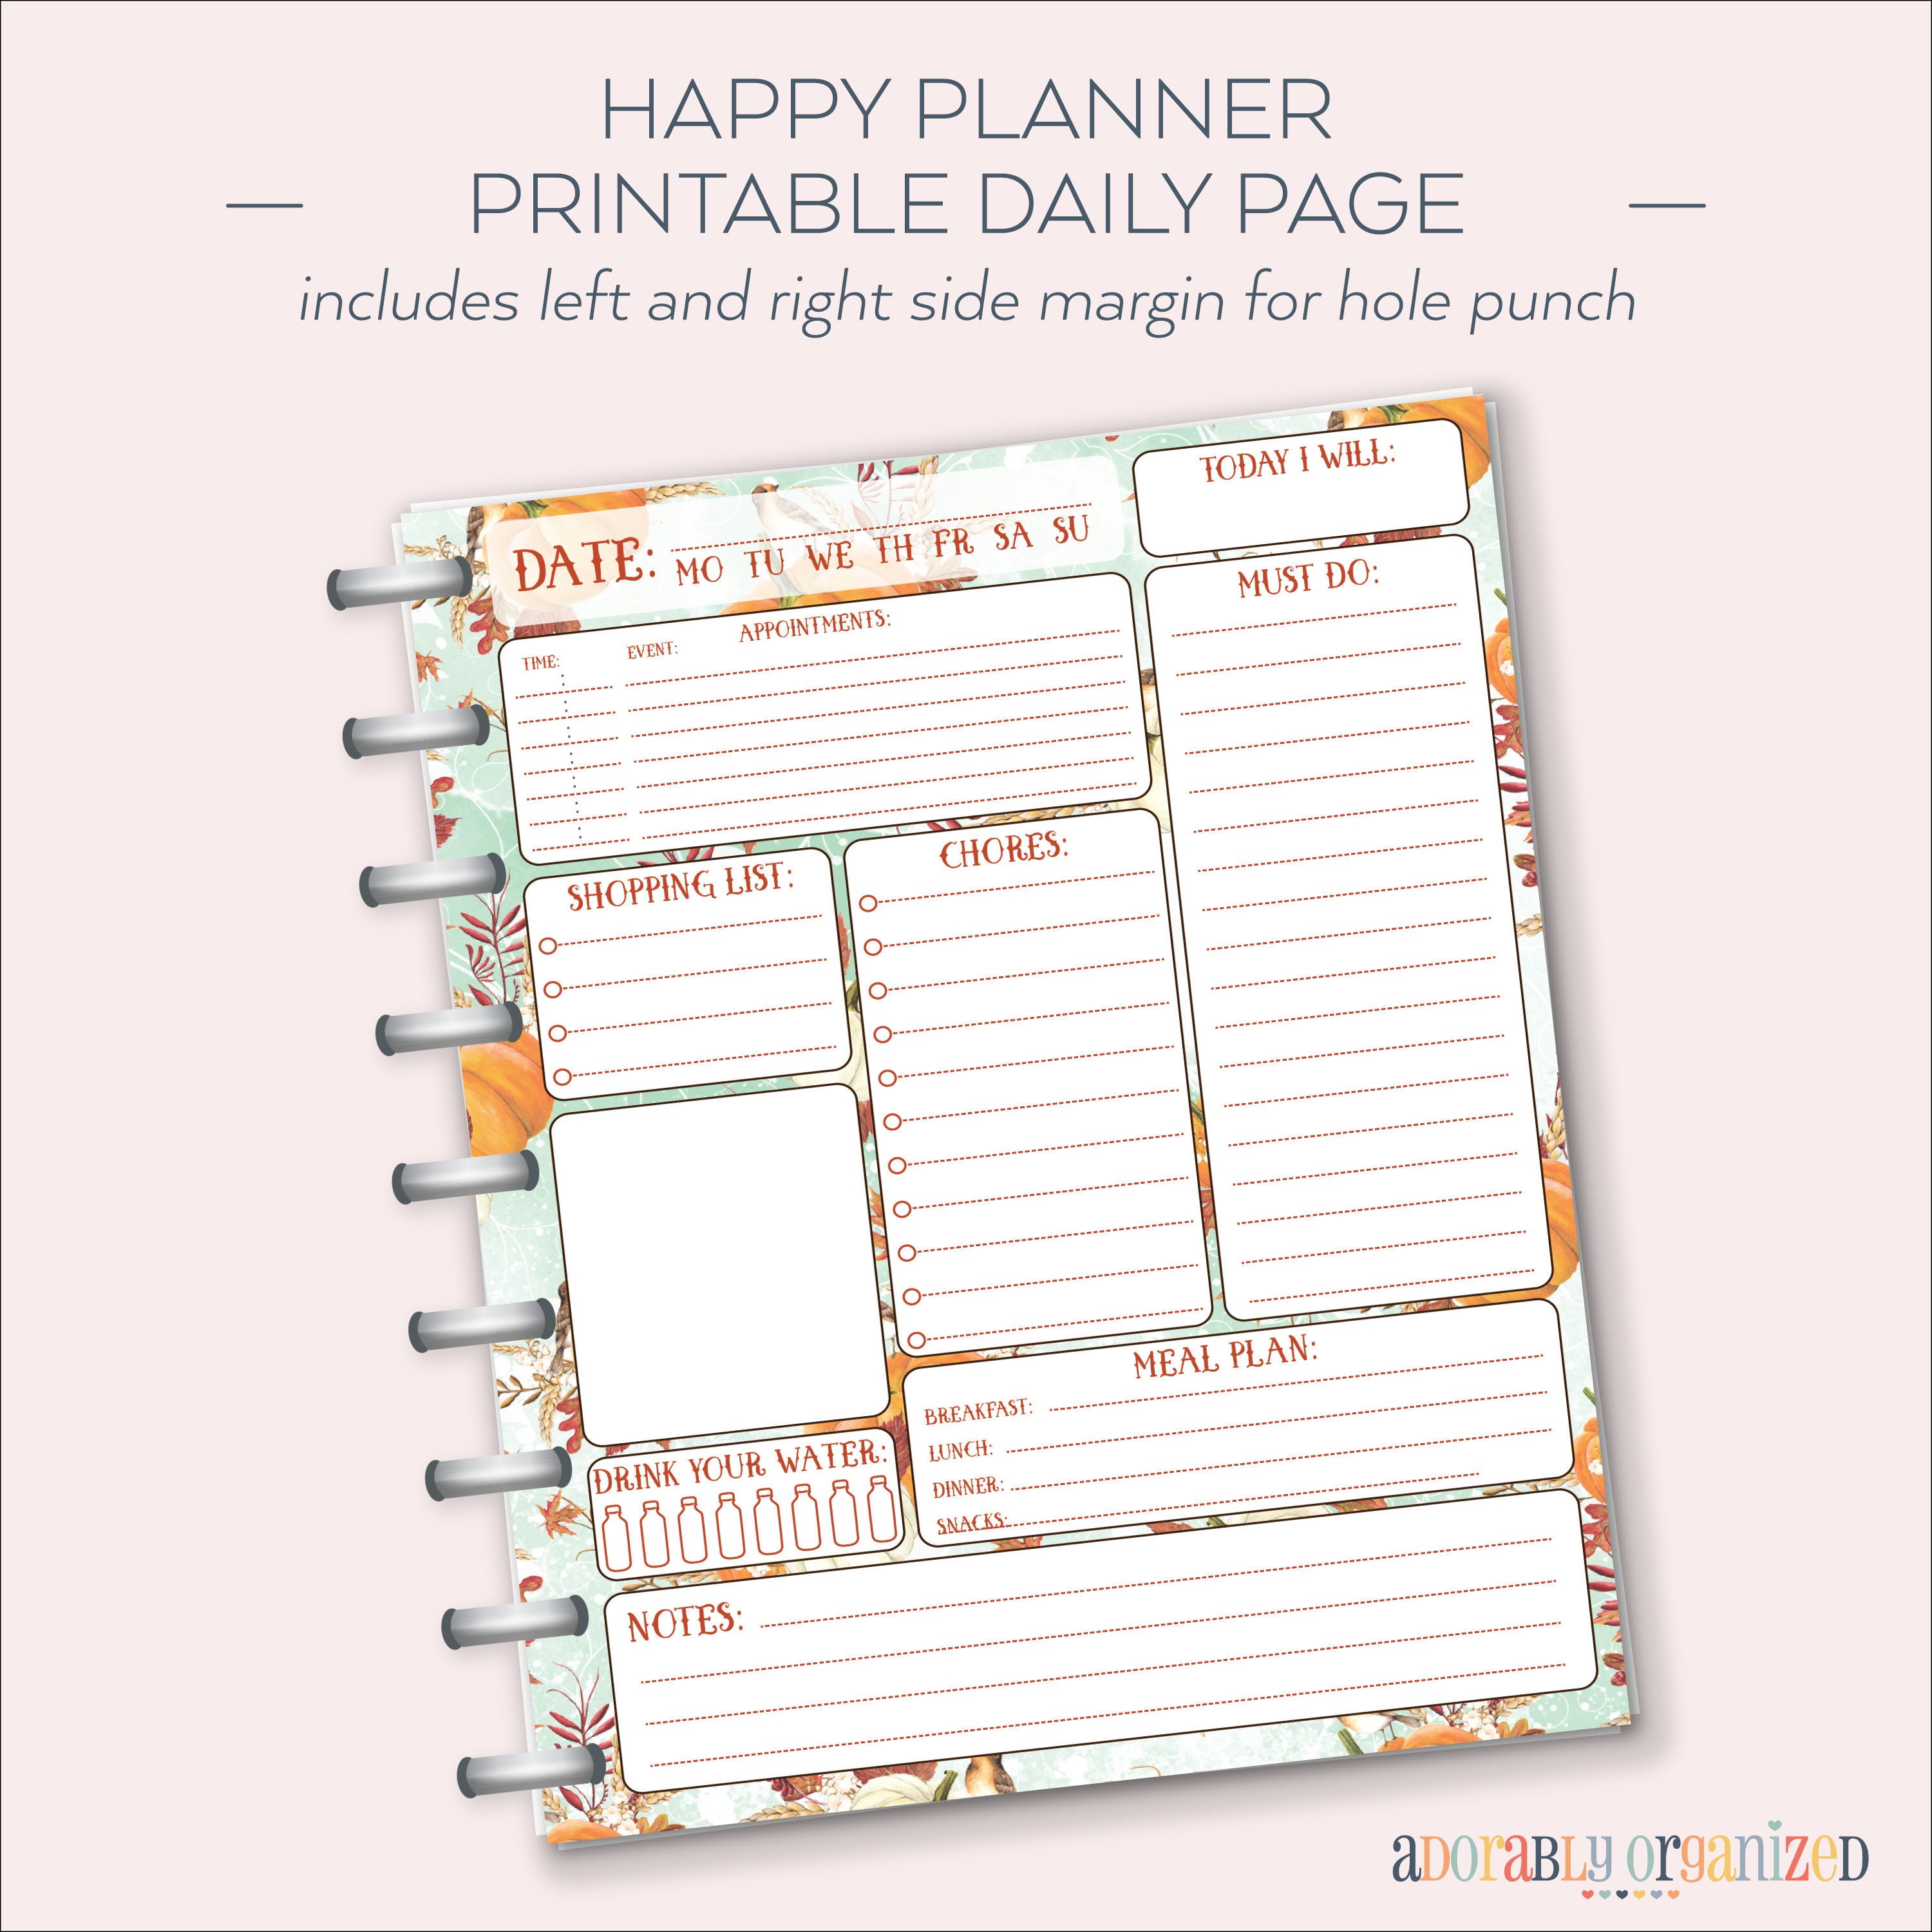 A5 Planner Inserts Daily Planner Printable A5 Filofax, A5 Planner Refill,  Filofax Refill, A5 Planner Pages, Day Planner, Daily Agenda 